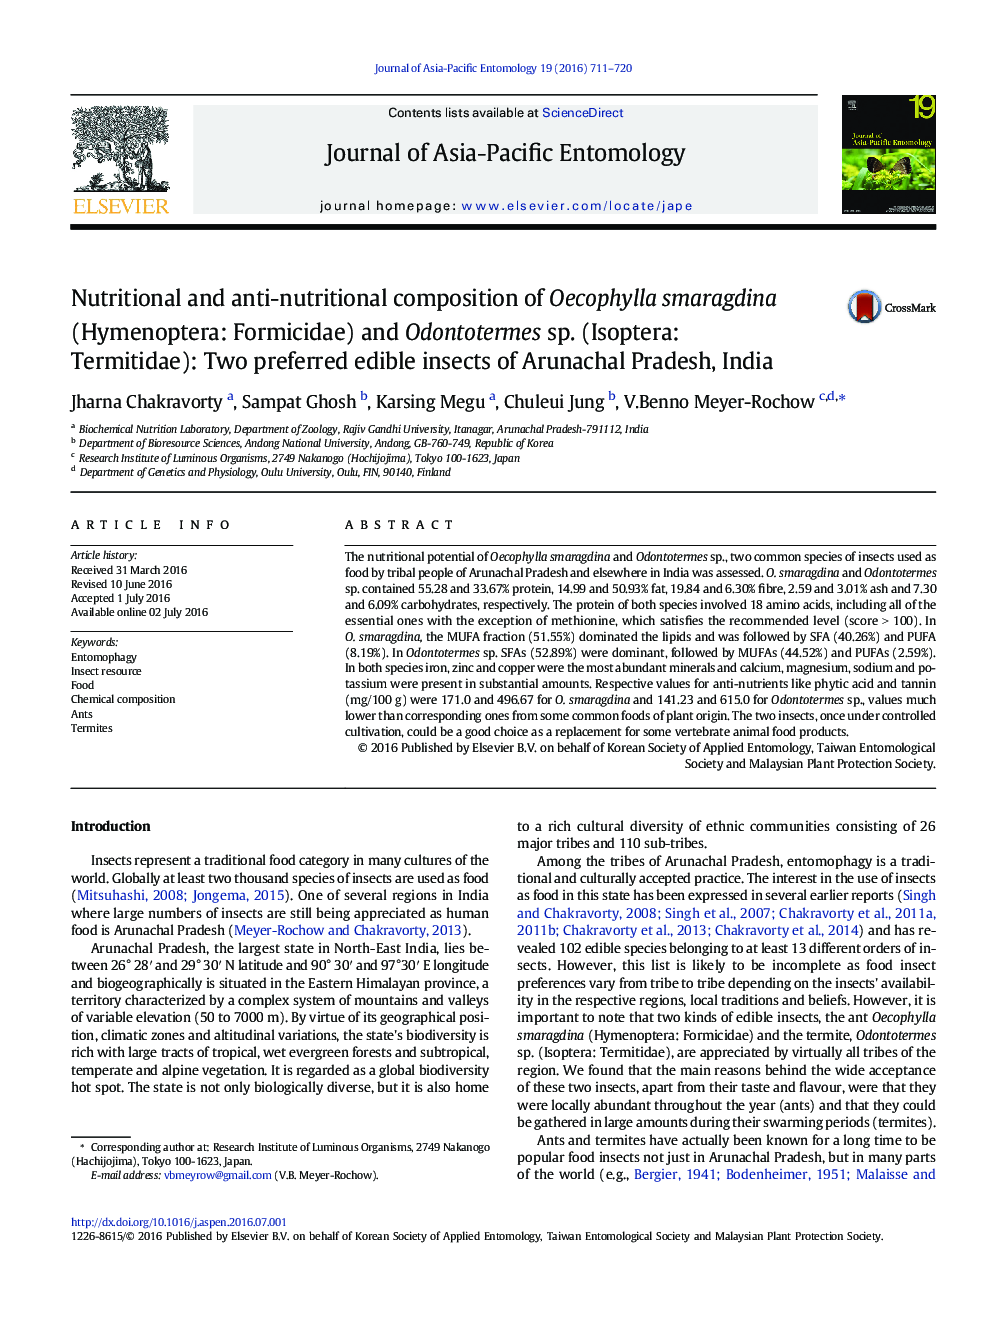 Nutritional and anti-nutritional composition of Oecophylla smaragdina (Hymenoptera: Formicidae) and Odontotermes sp. (Isoptera: Termitidae): Two preferred edible insects of Arunachal Pradesh, India